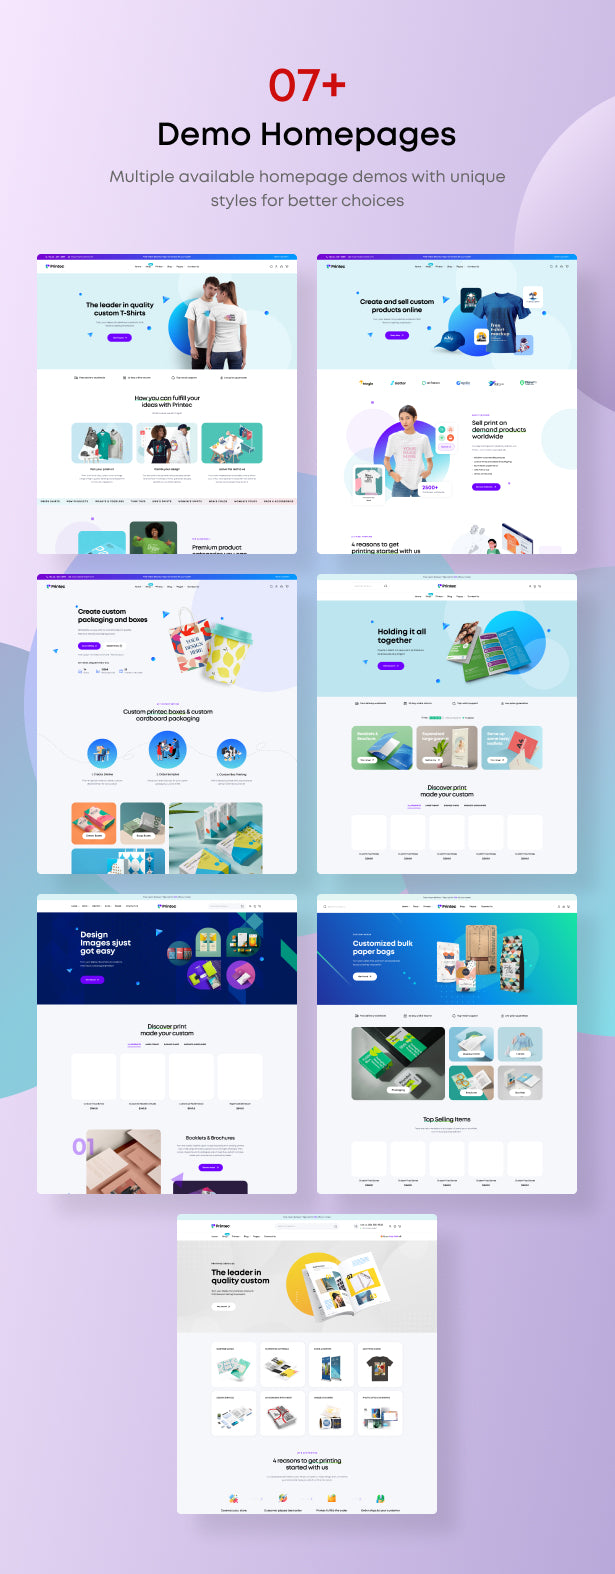 07+ Pre-made Homepages